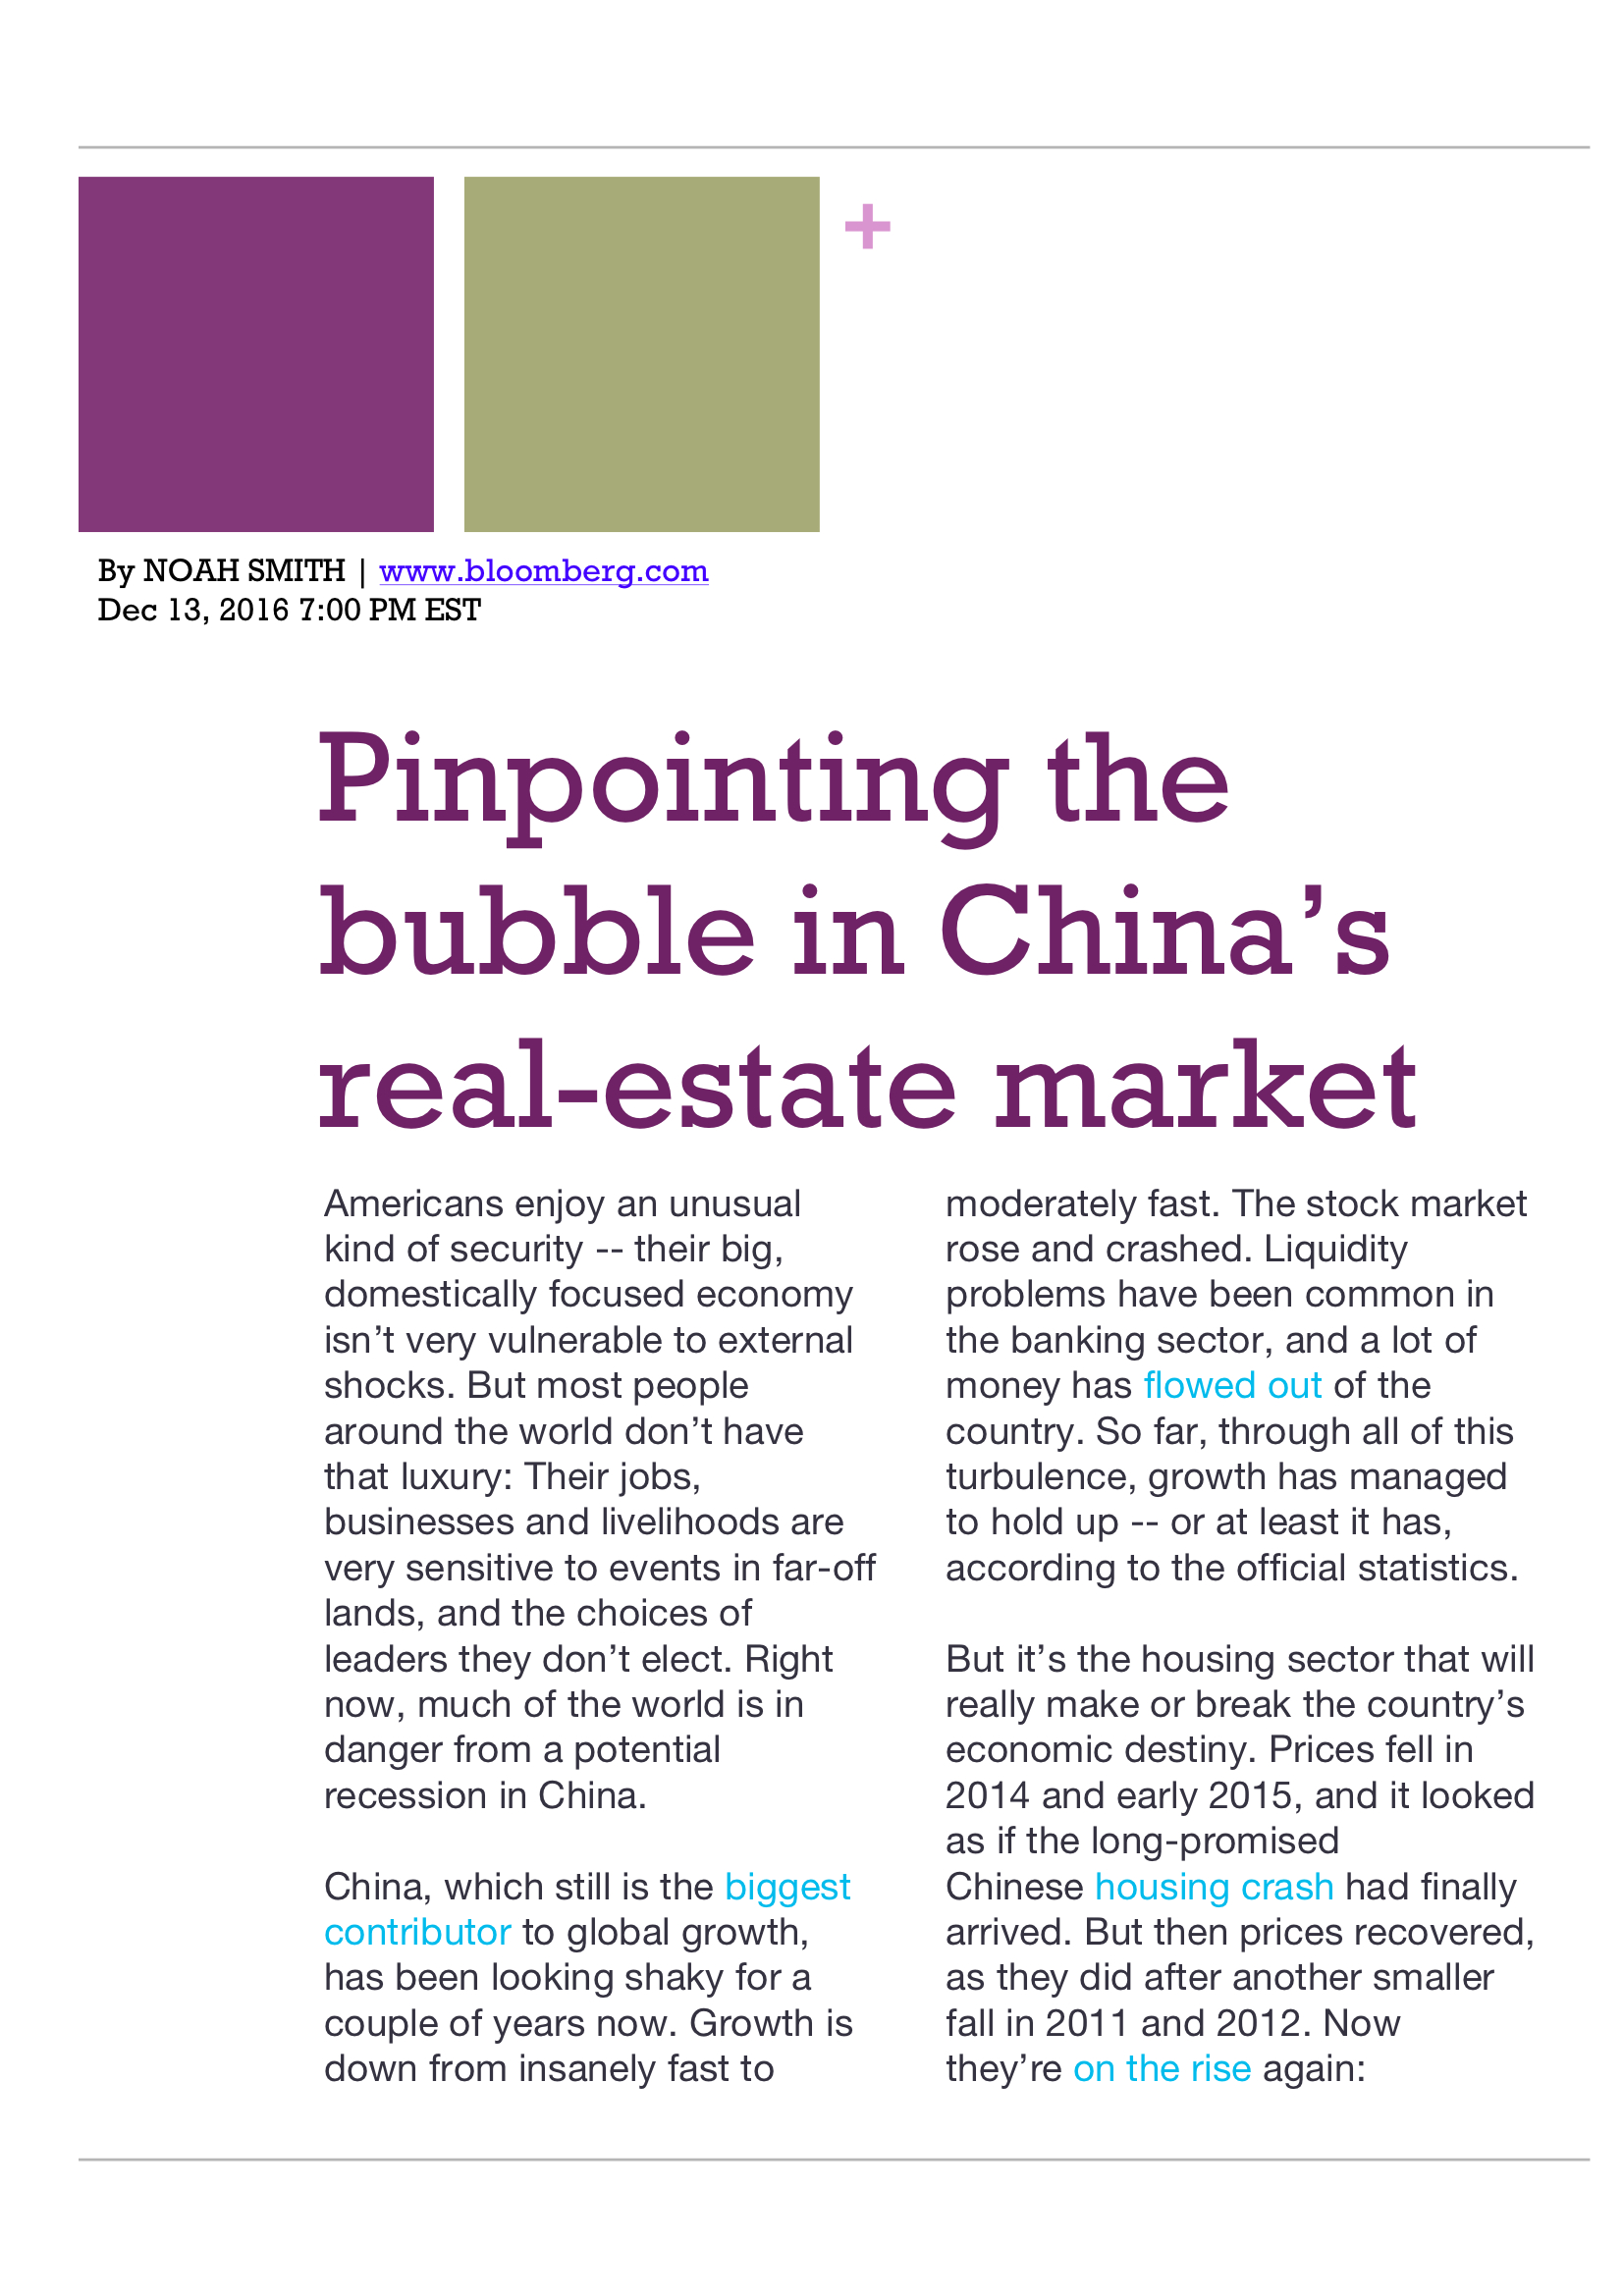 Pinpointing the Bubble in China’s Real-Estate Market